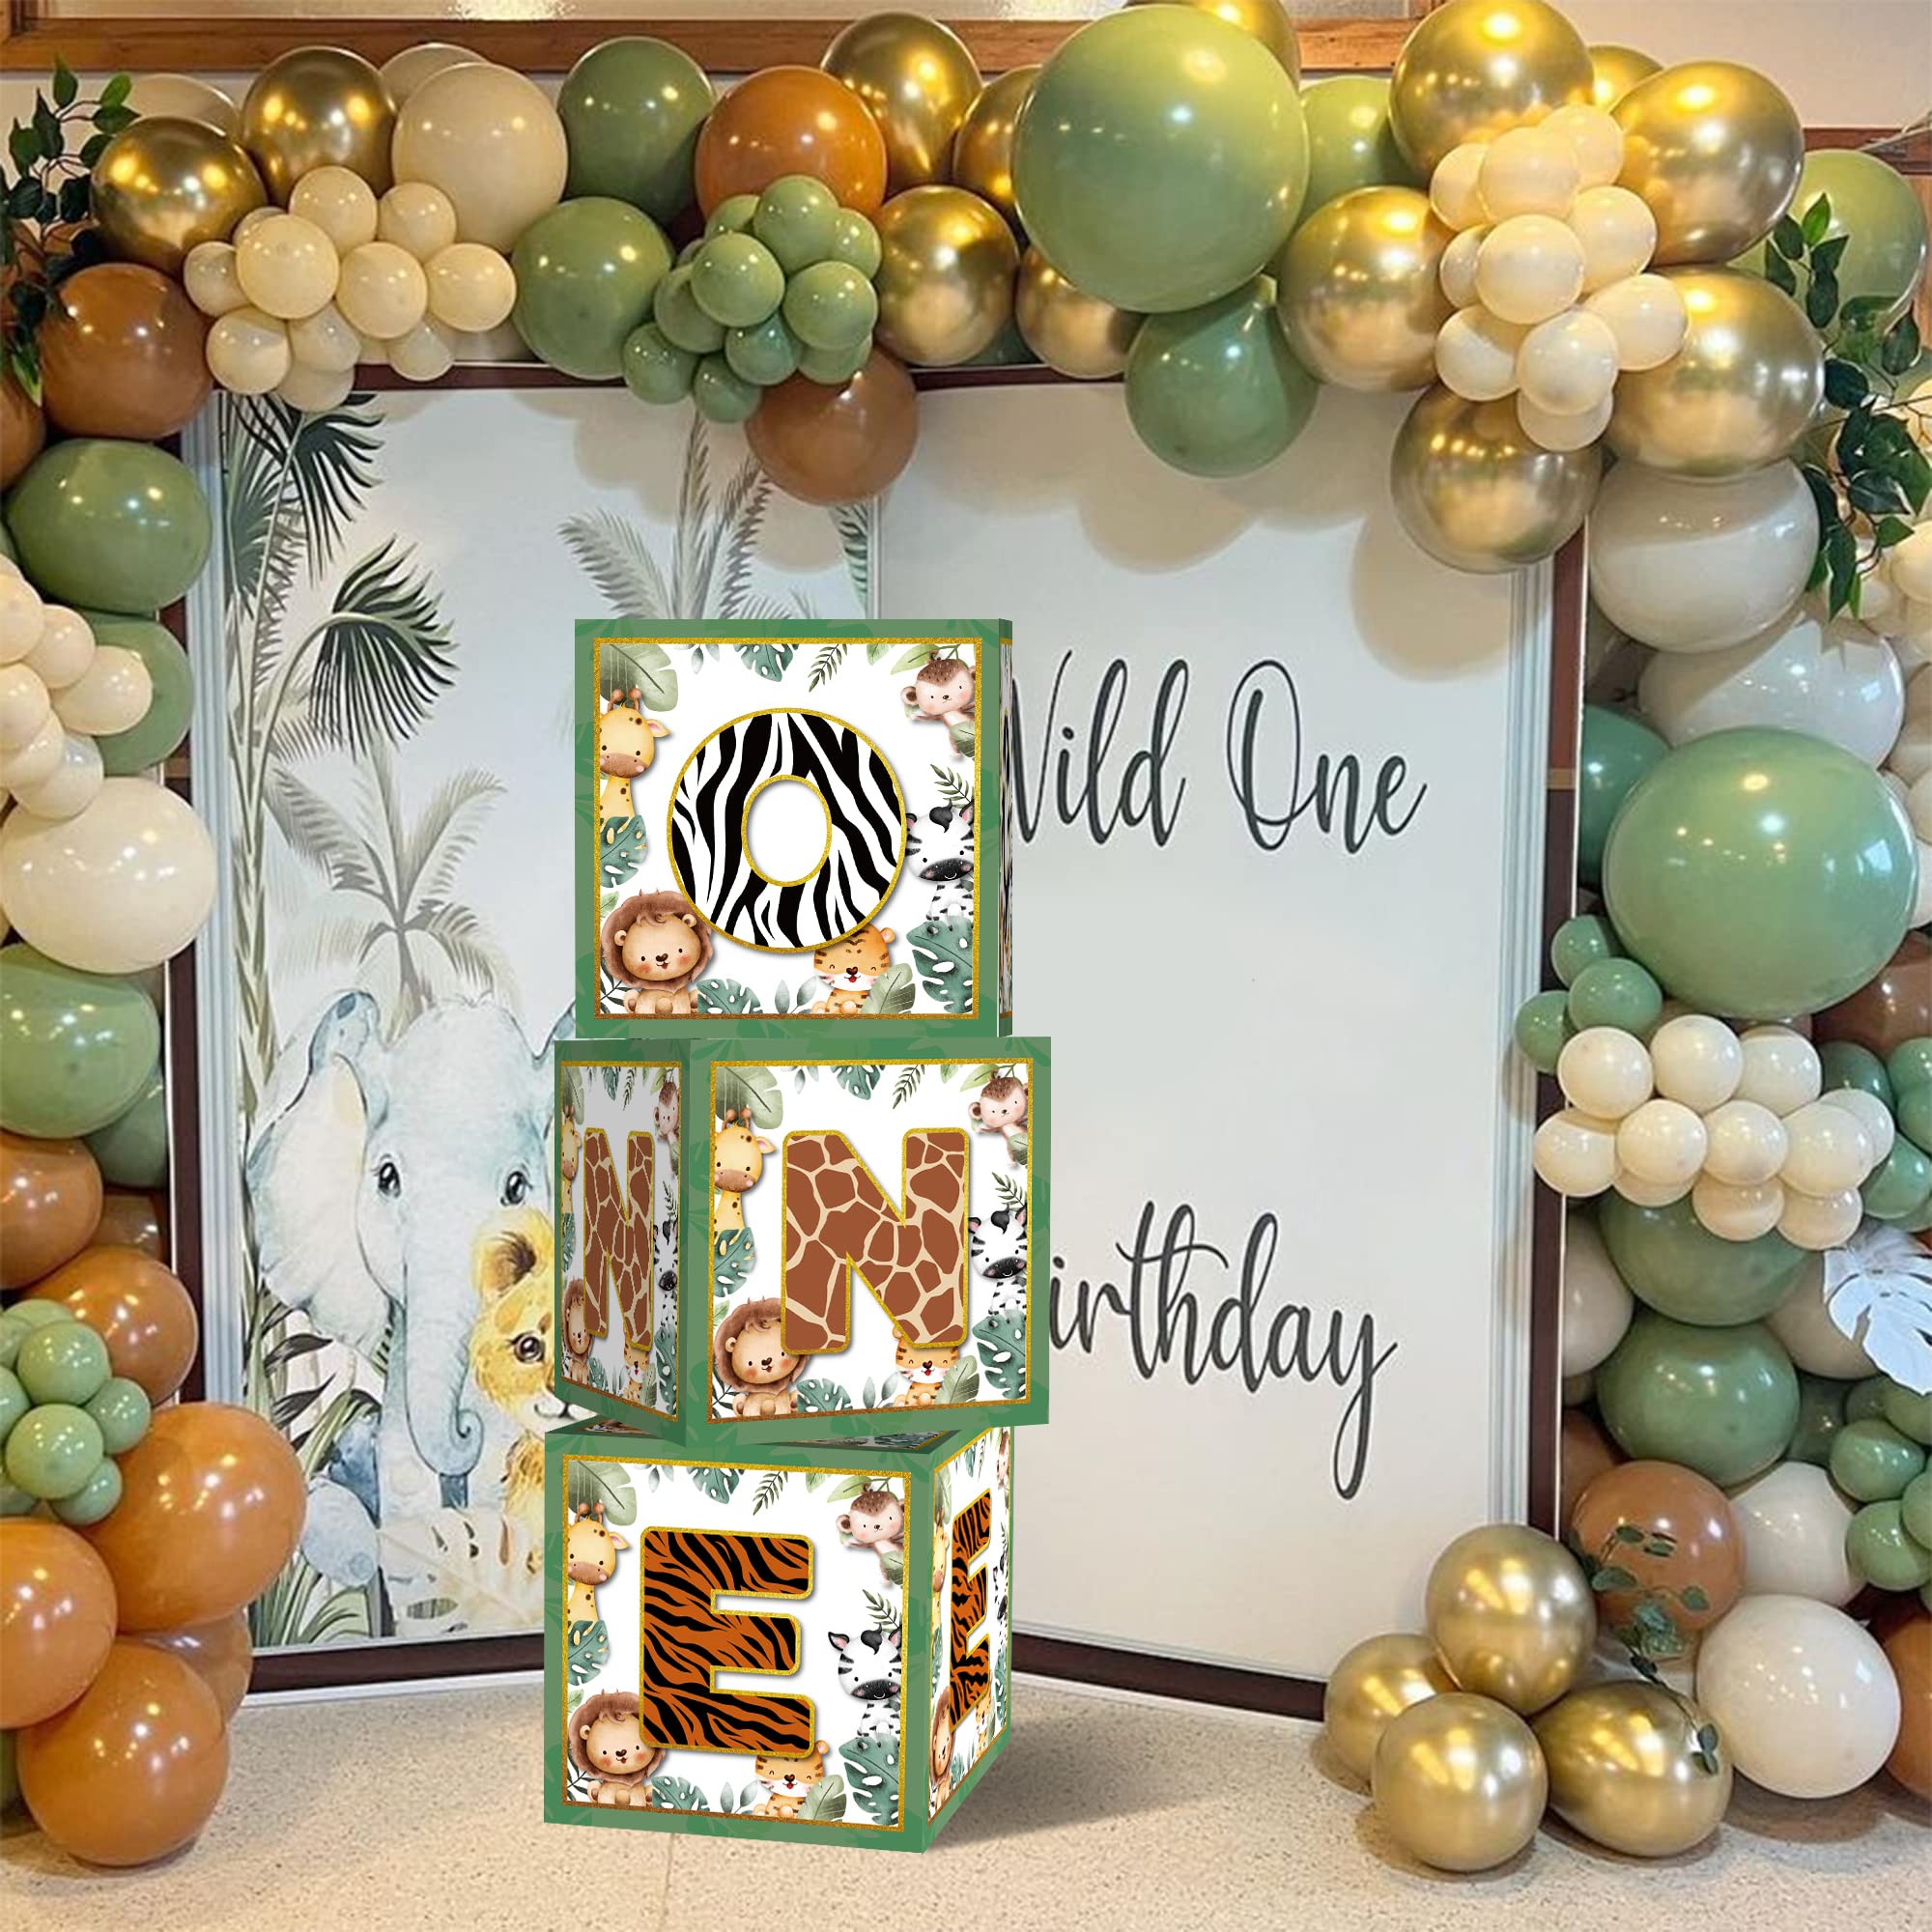 Wild One Balloon Boxes 1st Birthday Party Supplies Jungle Safari Animals Wild One Birthday Decorations for Boy Baby First Birthday Wild One Party Decorations (Green)